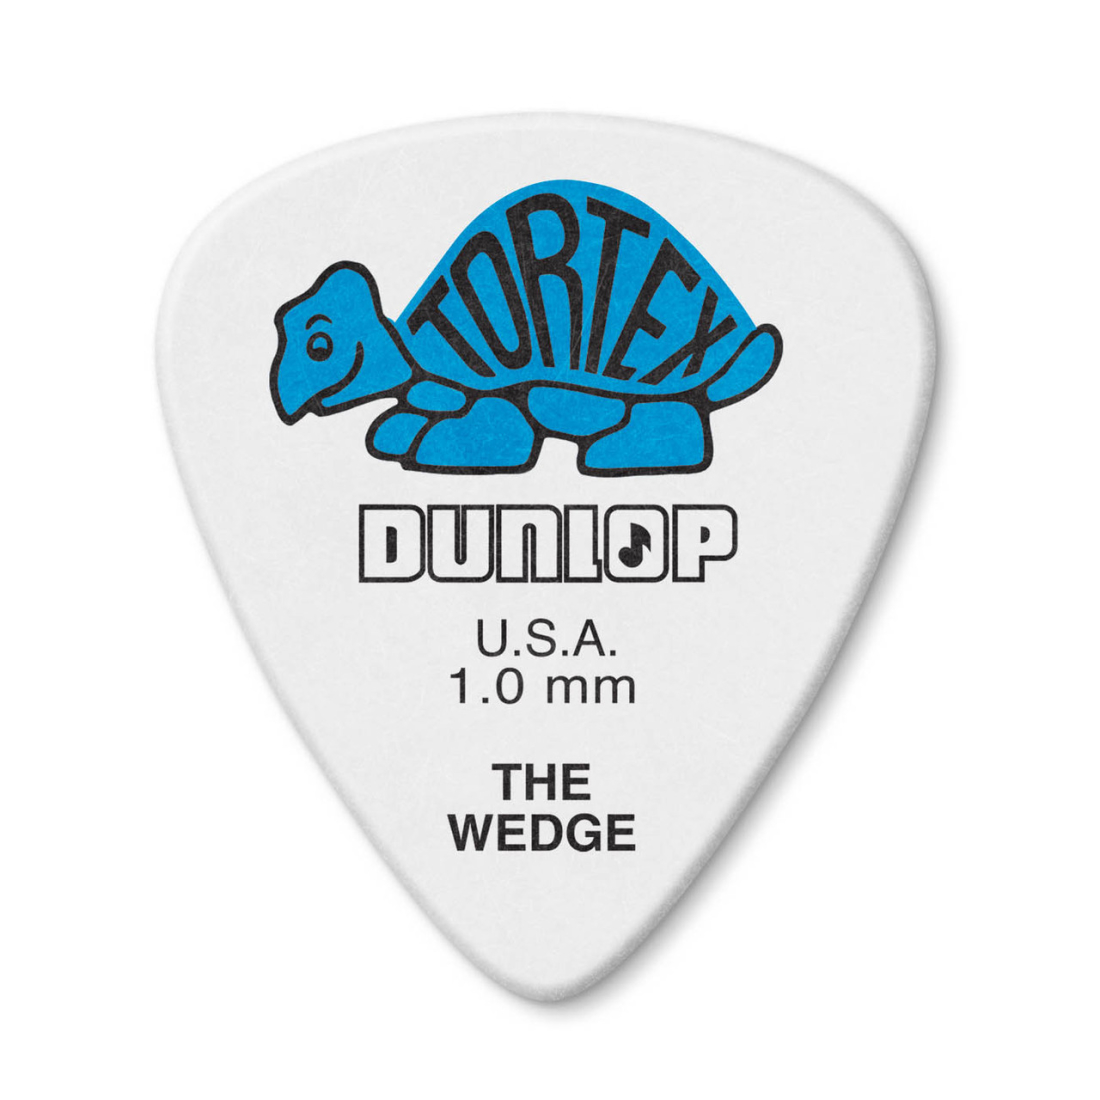 Tortex Wedge Player\'s Pack. (12 Pack) - 1.0mm